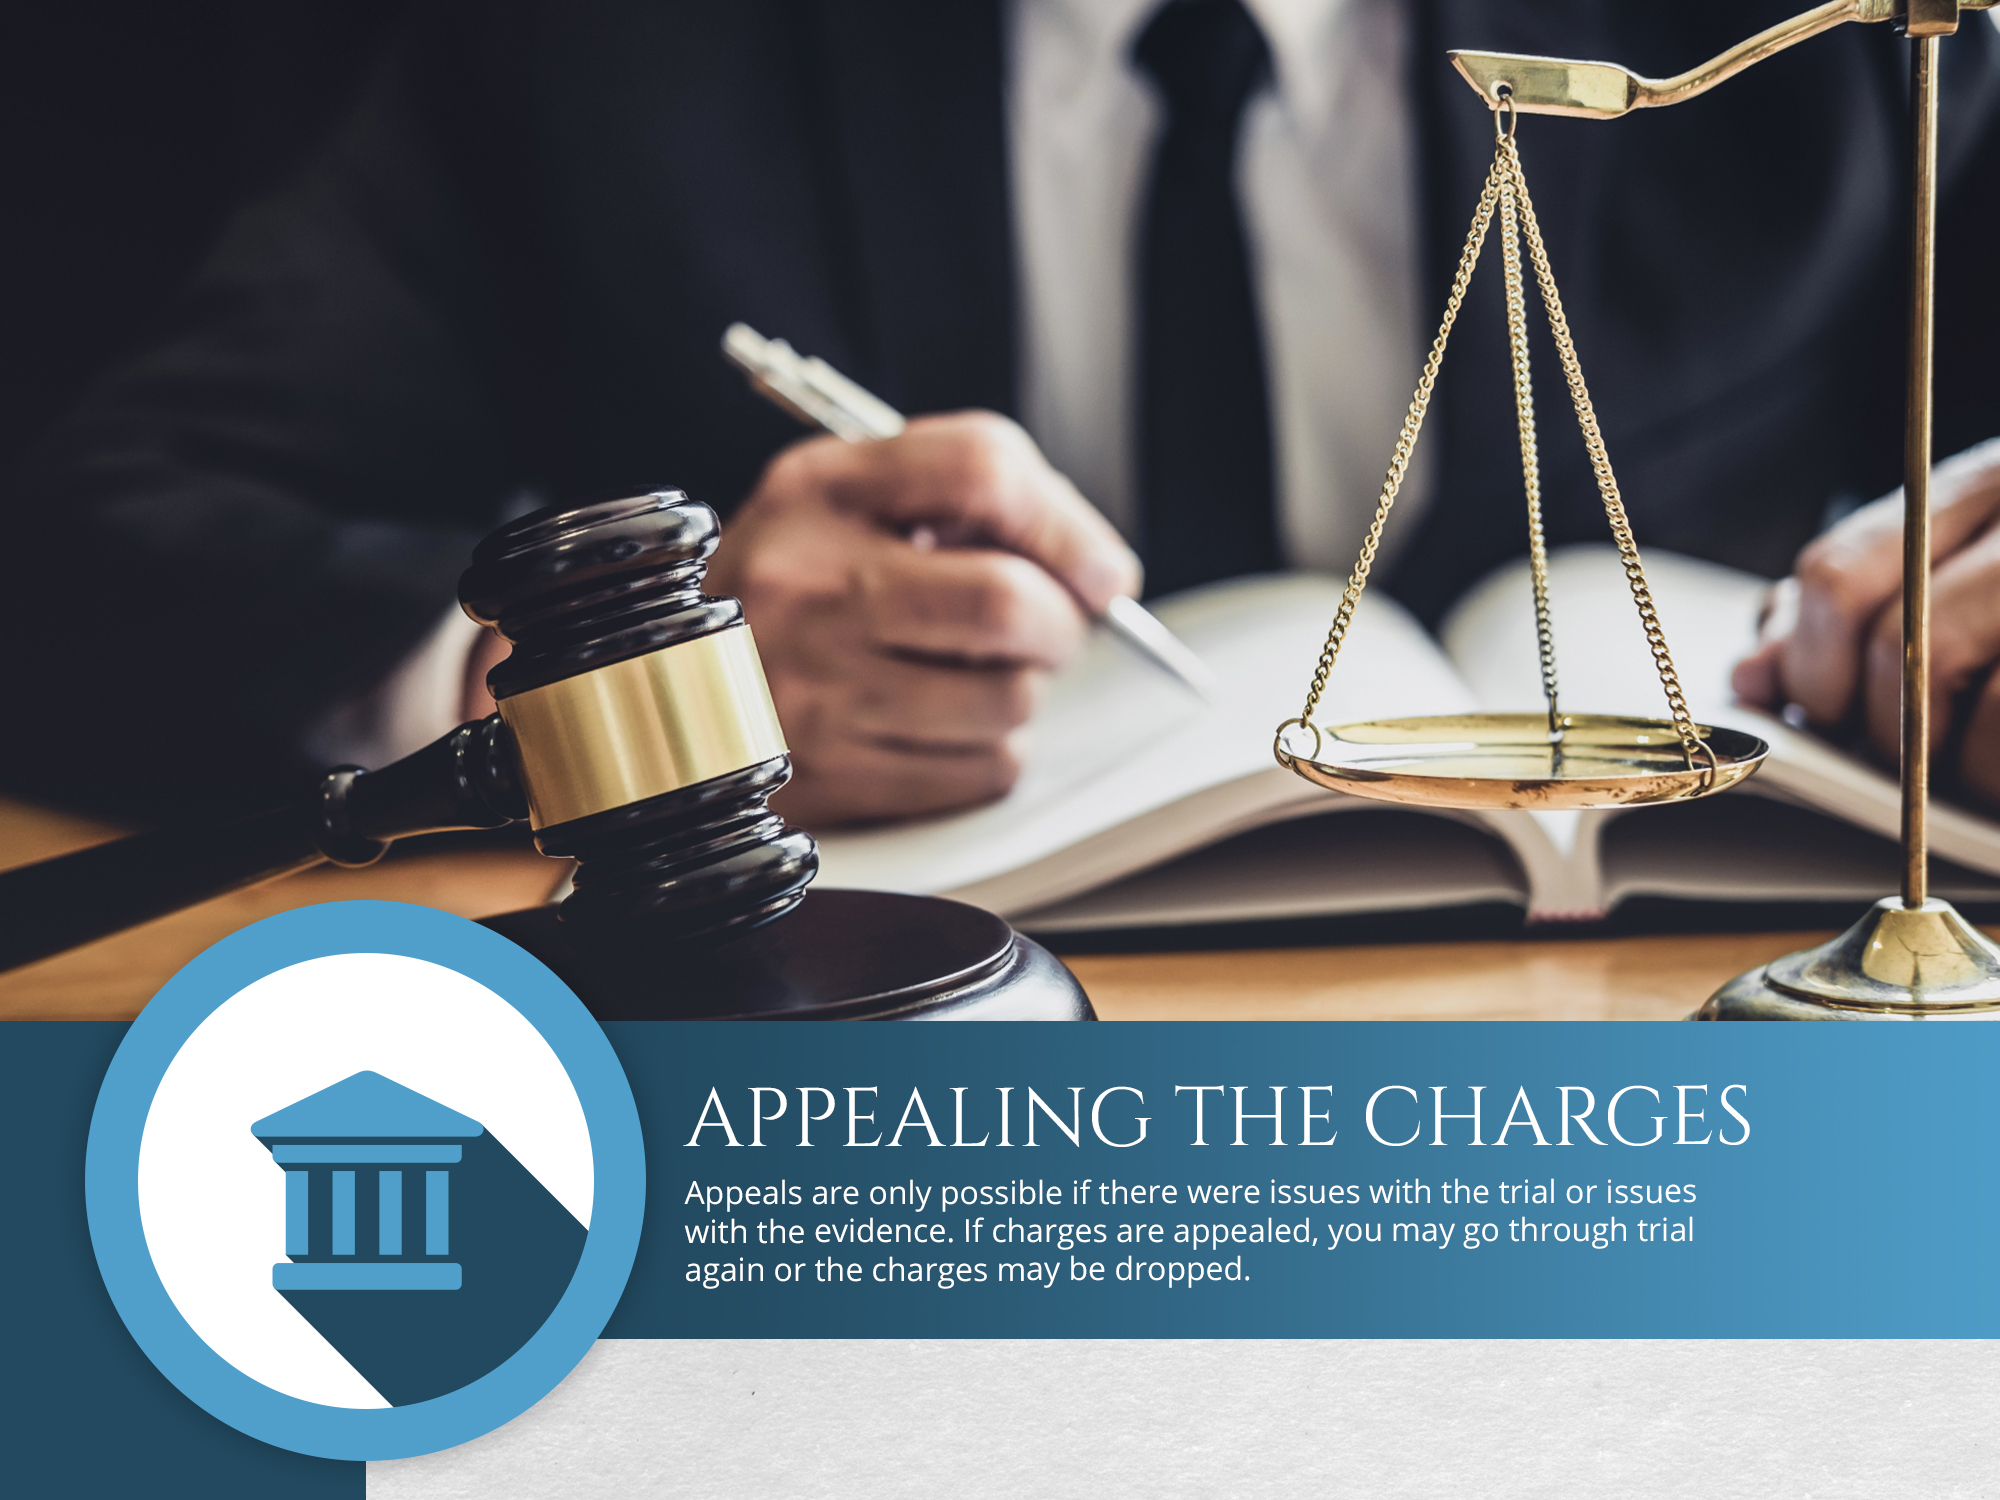 Appealing the charges